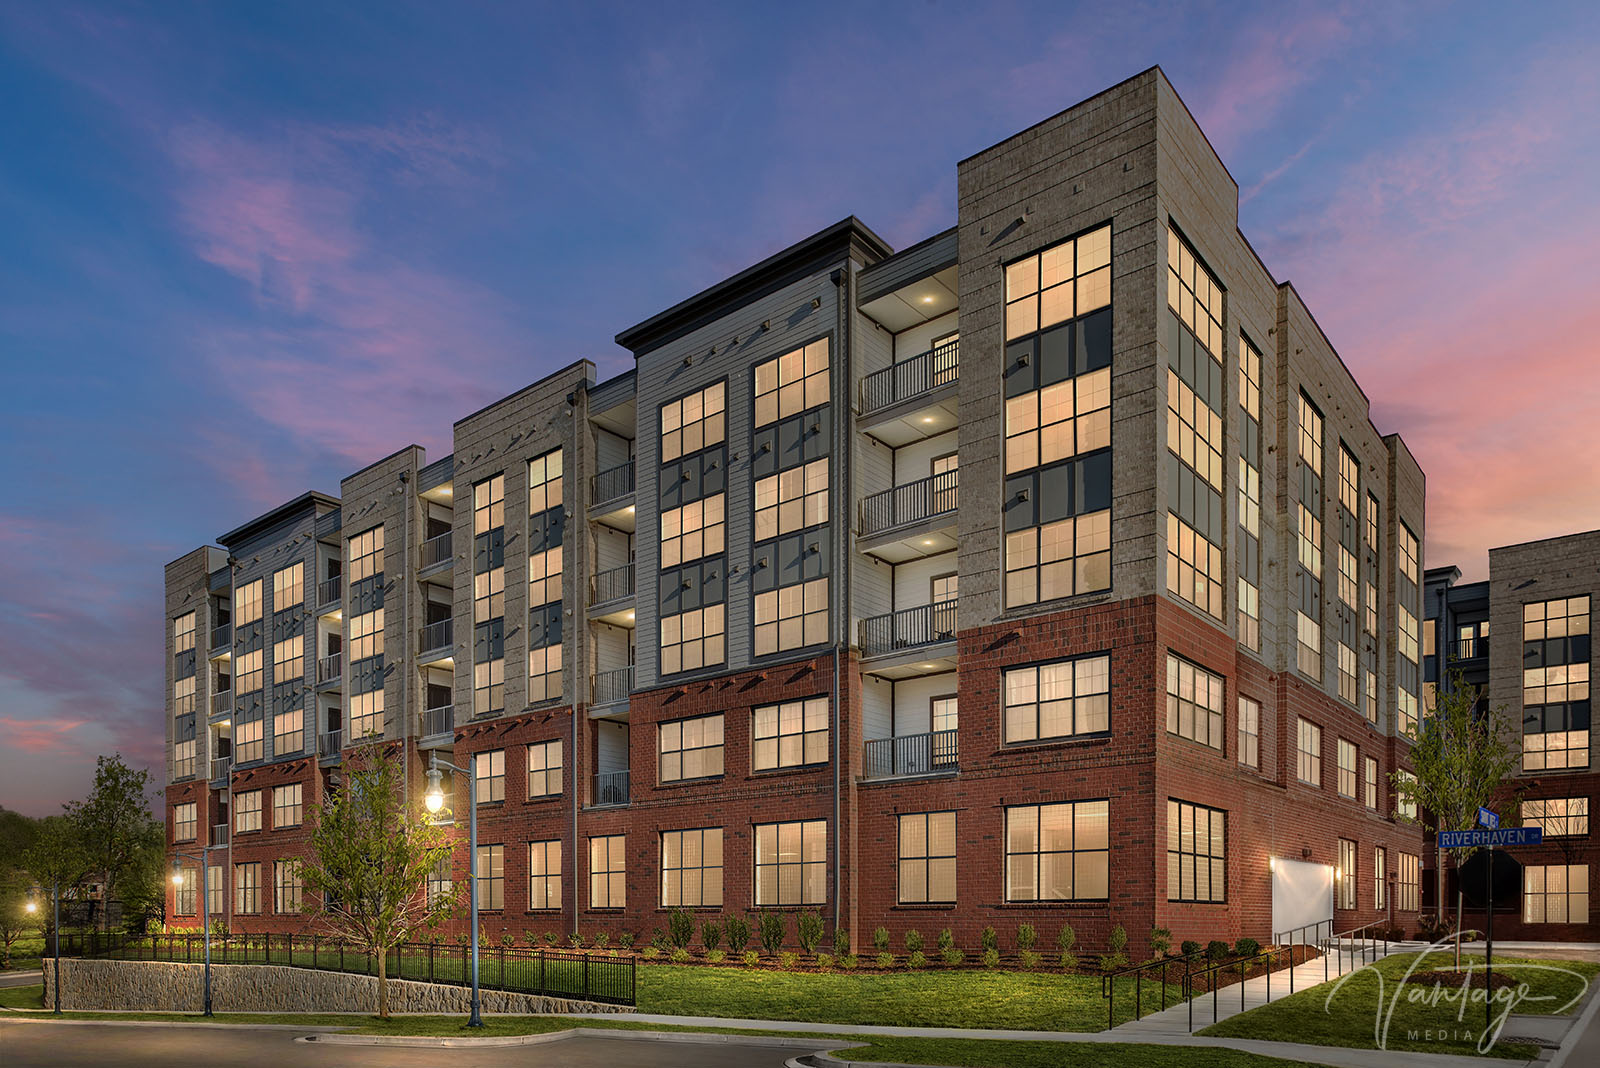 Flats at National Harbor by Pulte